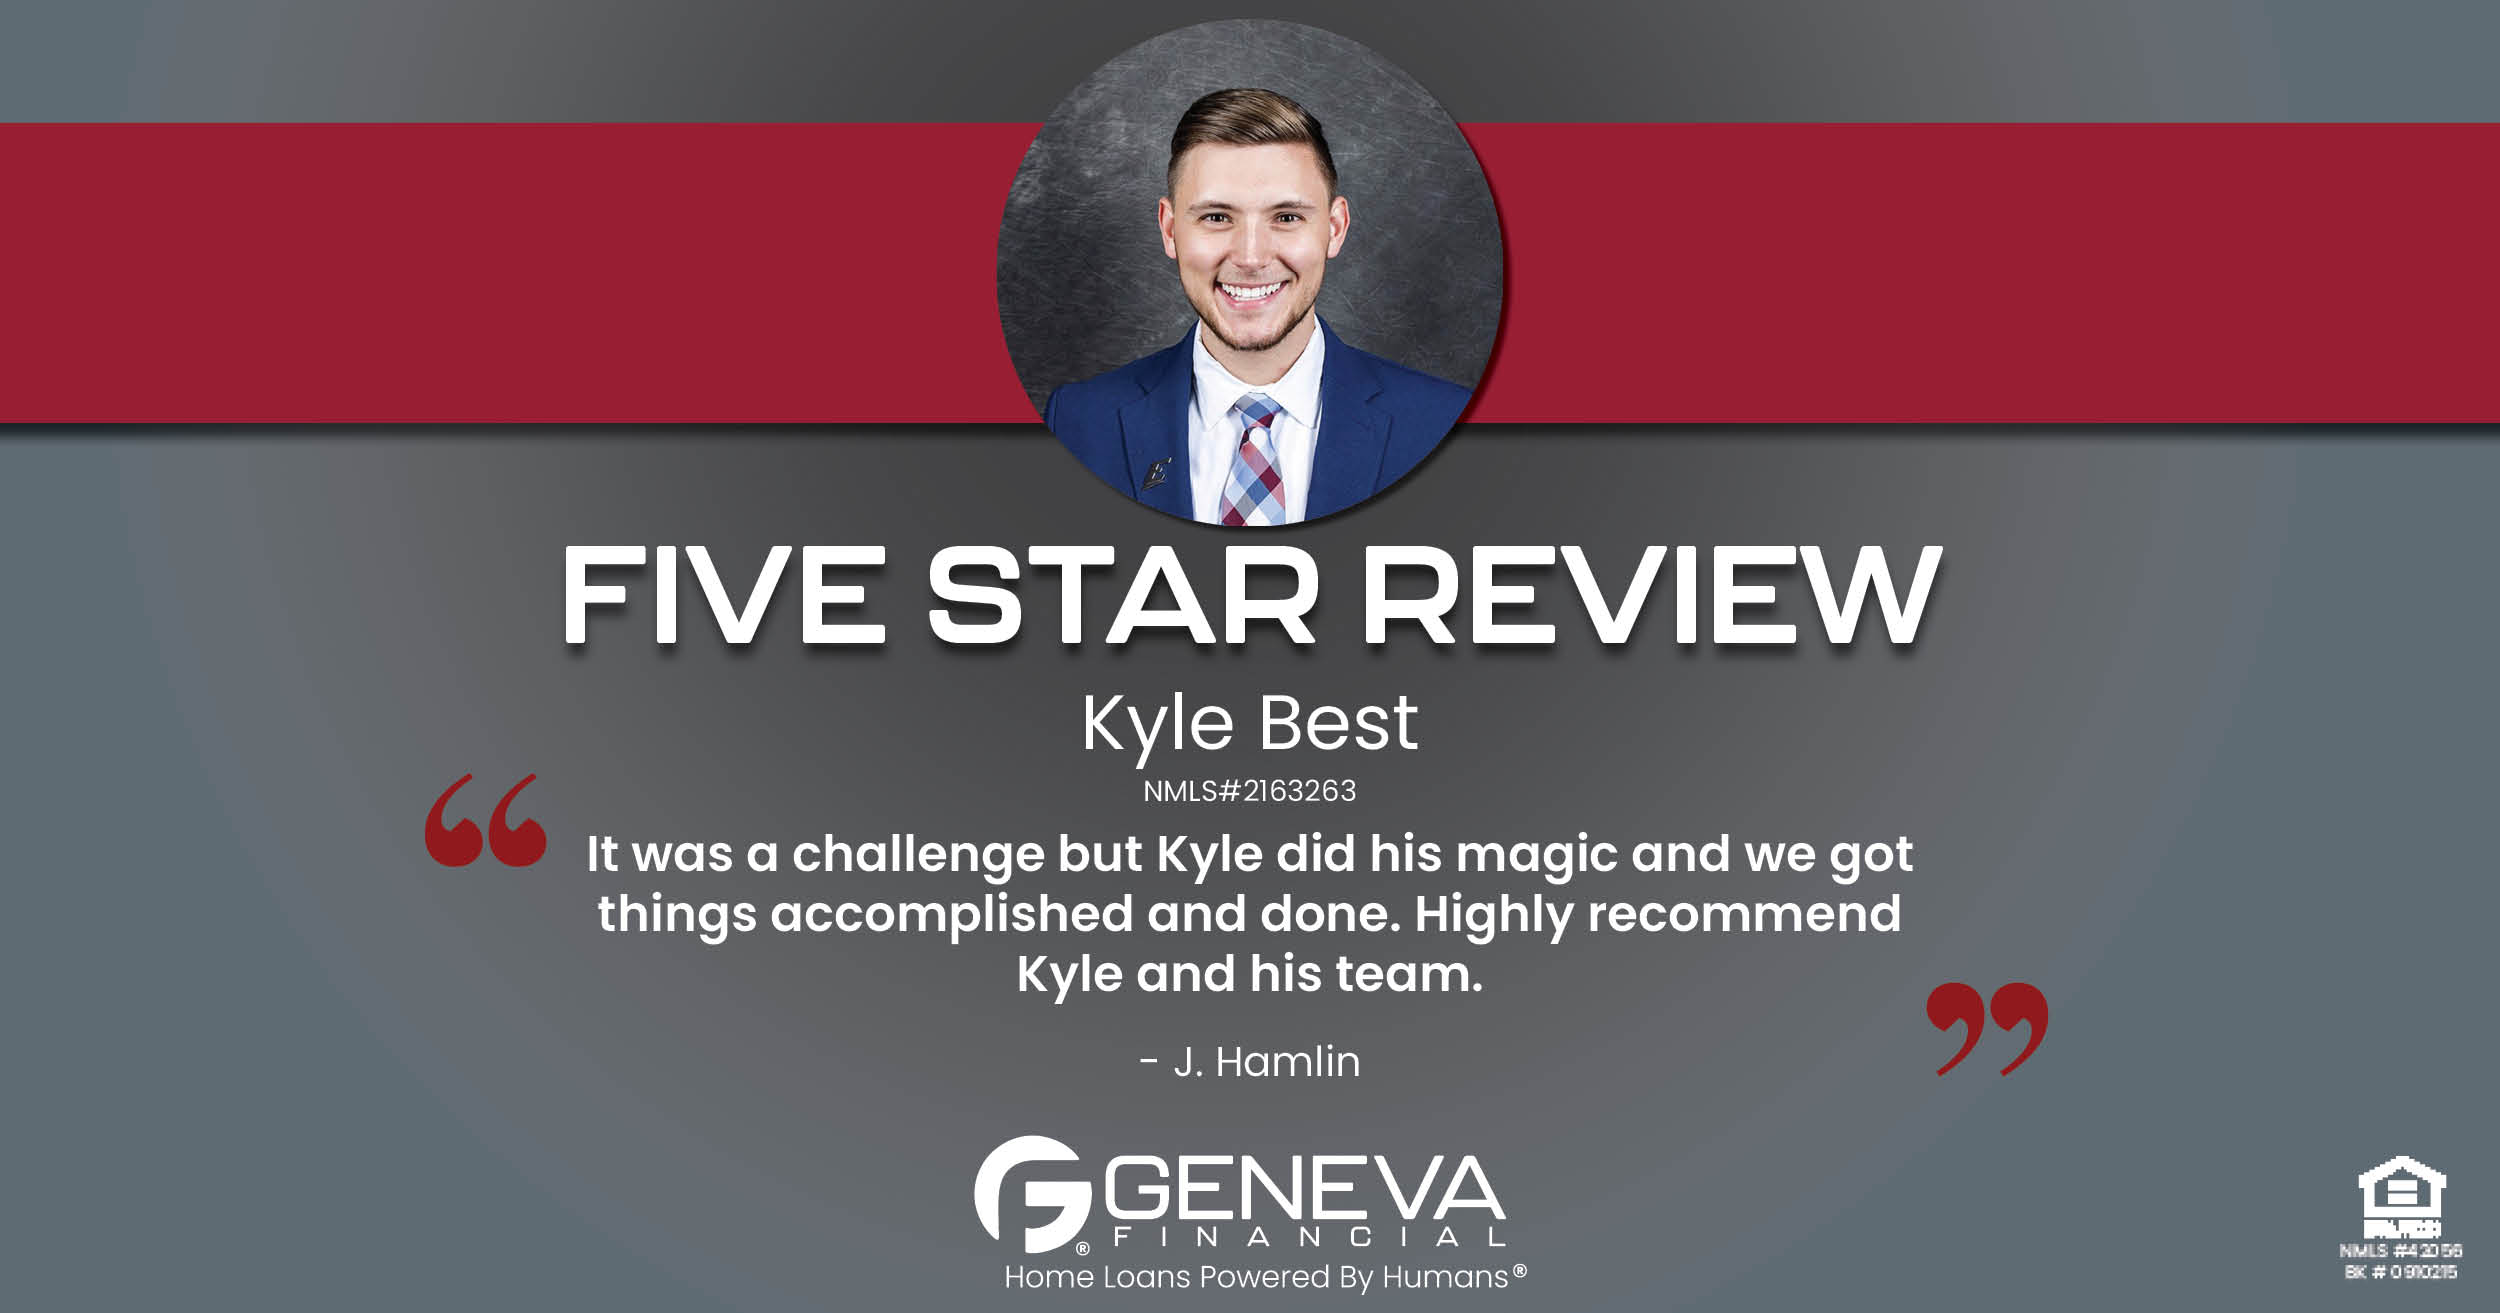 5 Star Review for Kyle Best, Licensed Mortgage Loan Officer with Geneva Financial, Lexington, Kentucky – Home Loans Powered by Humans®.